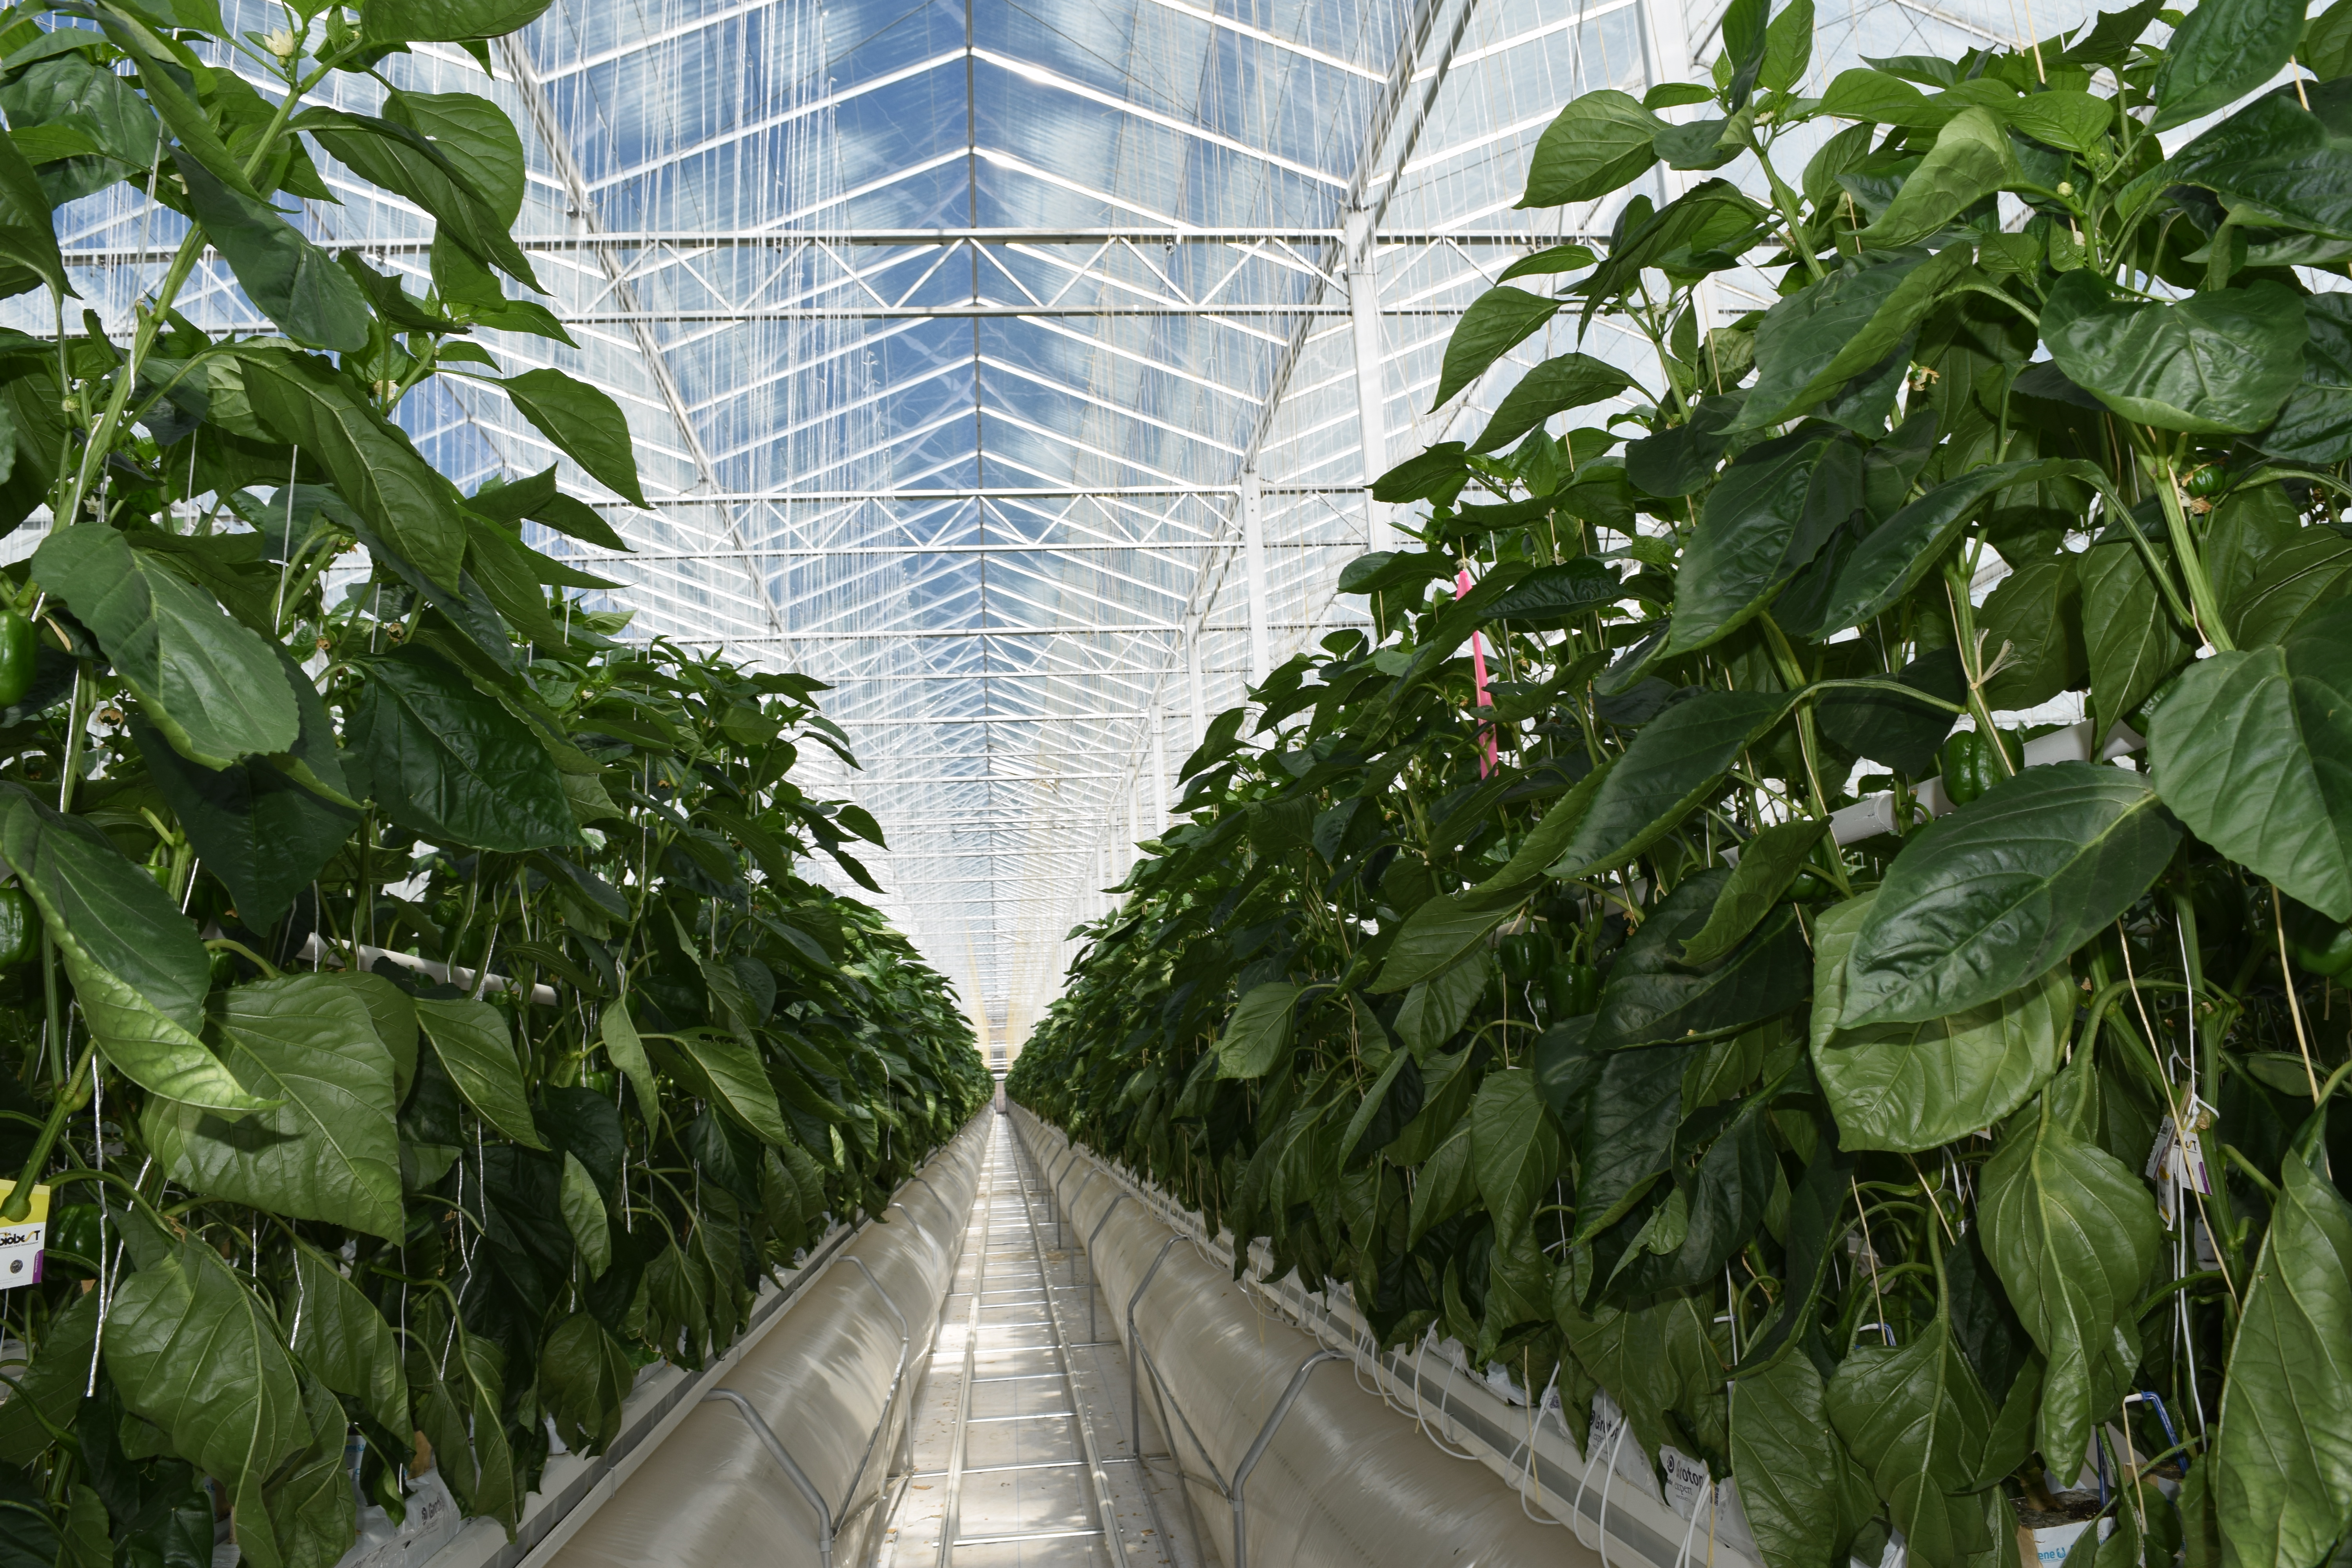  Caterpillar Inc. and Sun Select Produce Inc. Announce Plans for Greenhouse Collaboration 